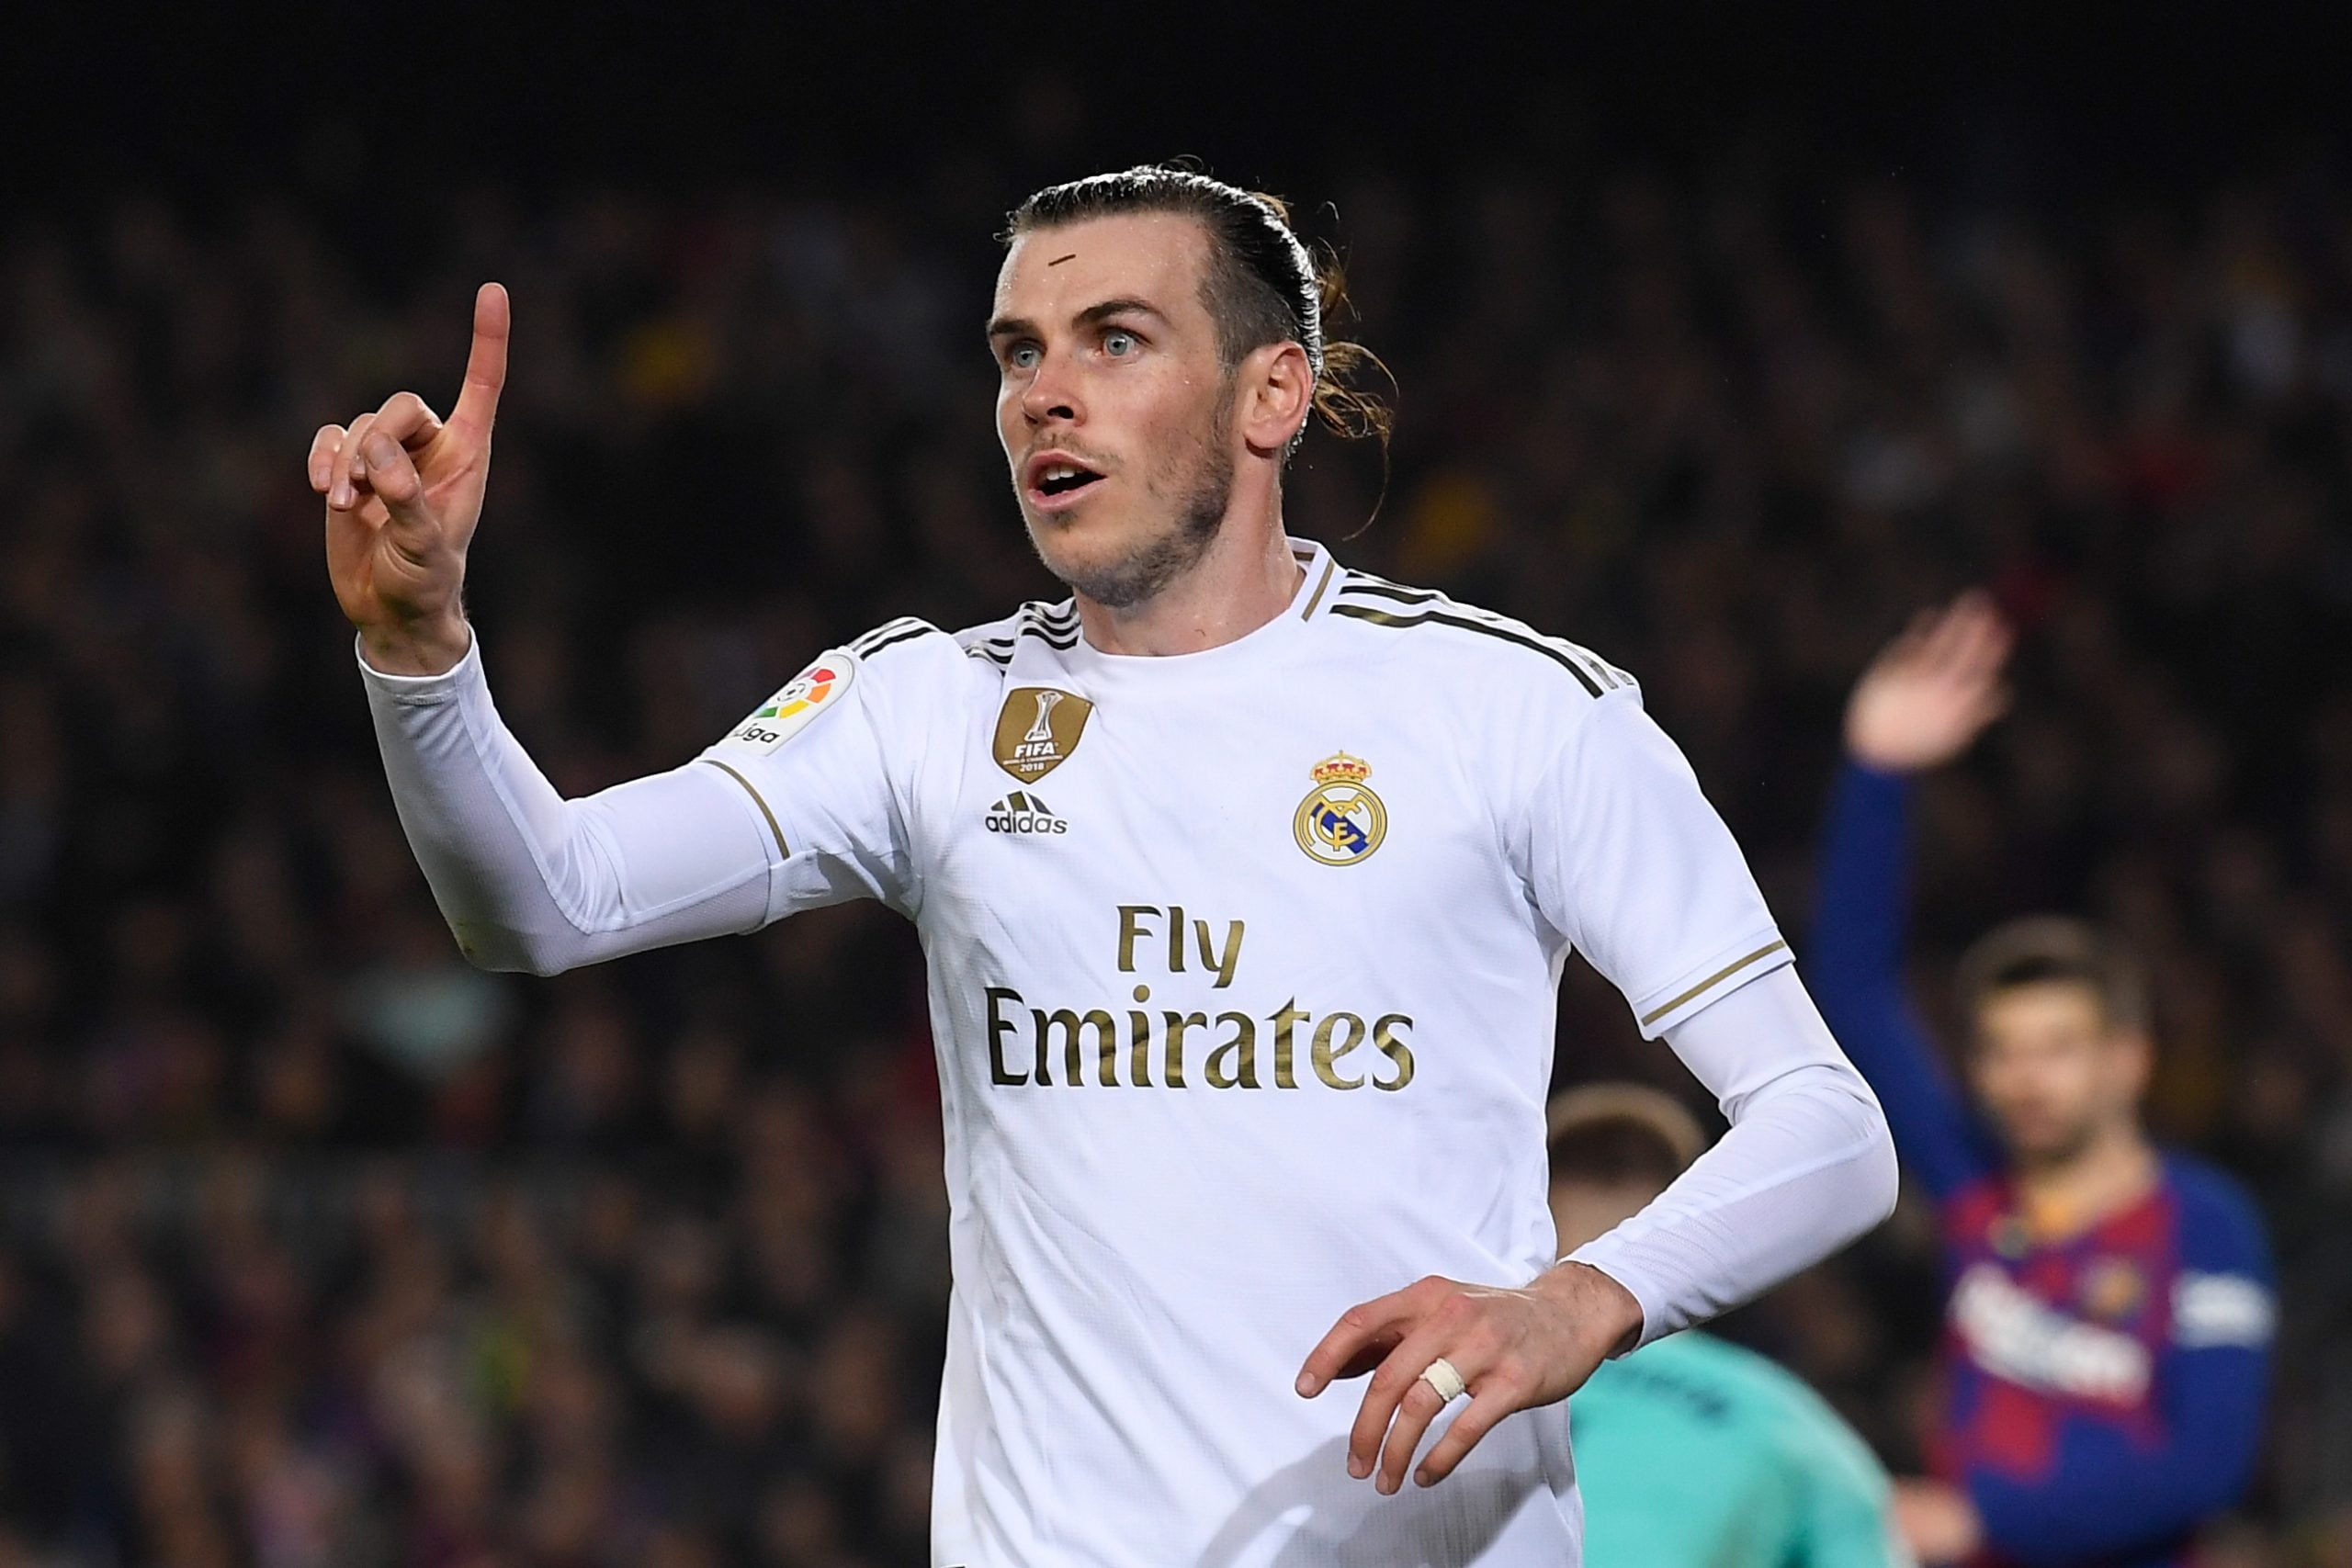 Real Madrid's Welsh forward Gareth Bale reacts during the "El Clasico" Spanish League football match between Barcelona FC and Real Madrid CF at the Camp Nou Stadium in Barcelona on December 18, 2019, (Photo by Josep LAGO / AFP) (Photo by JOSEP LAGO/AFP via Getty Images)